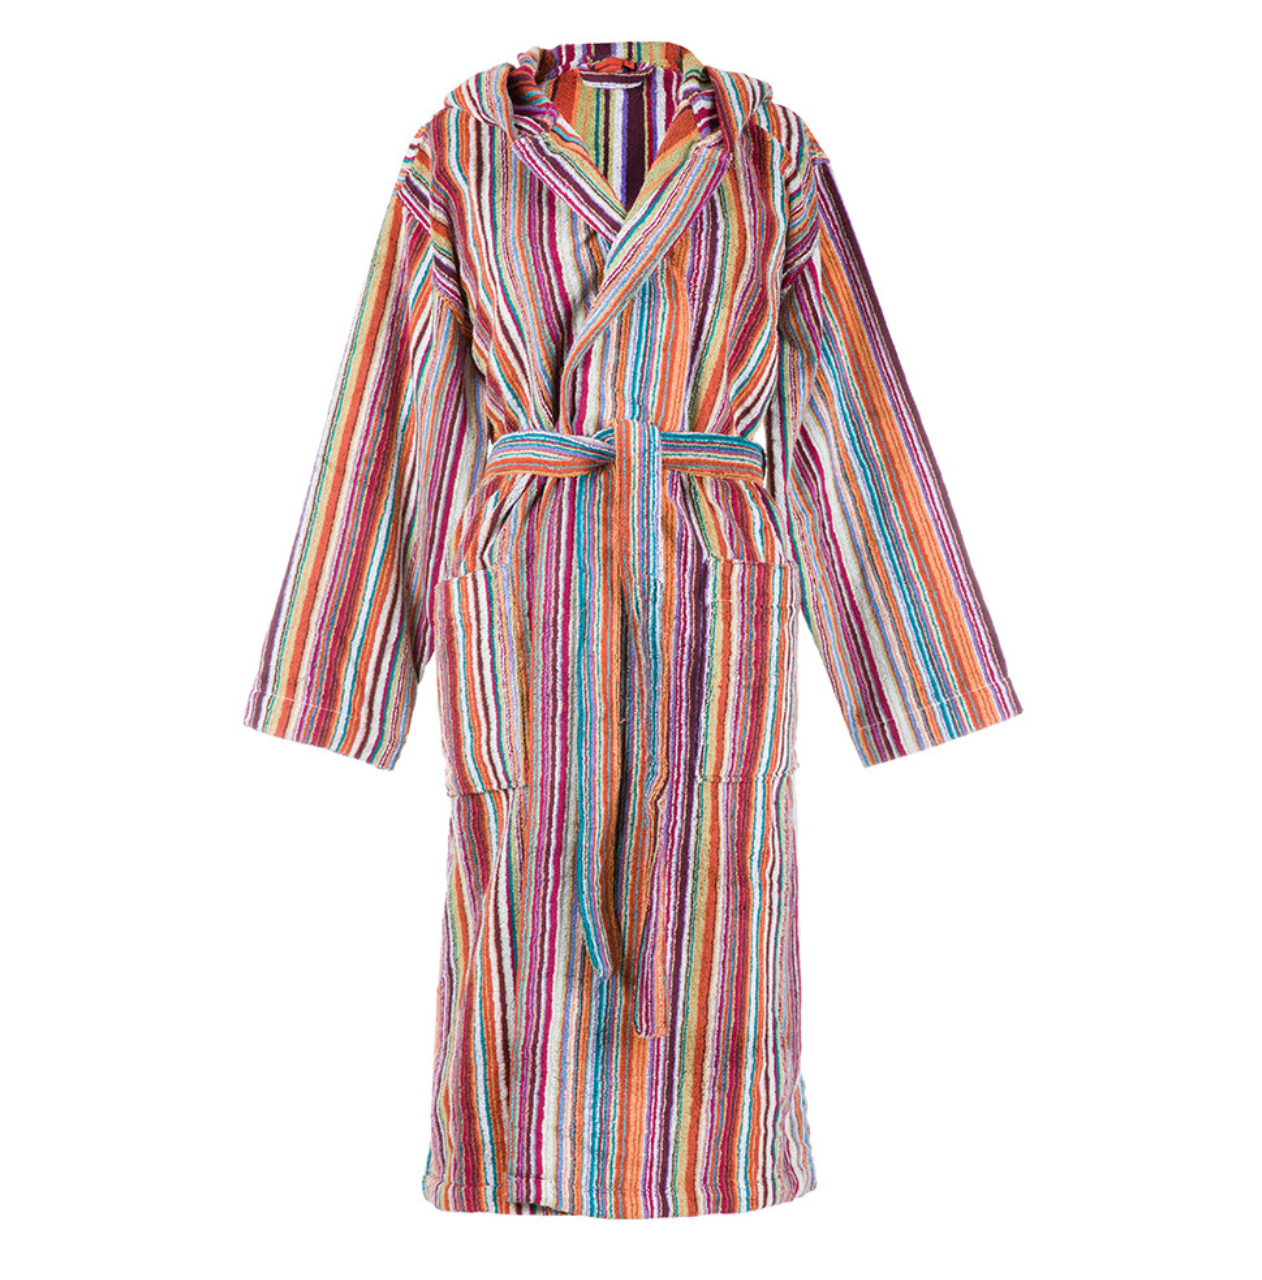 Details more than 111 missoni dressing gown latest